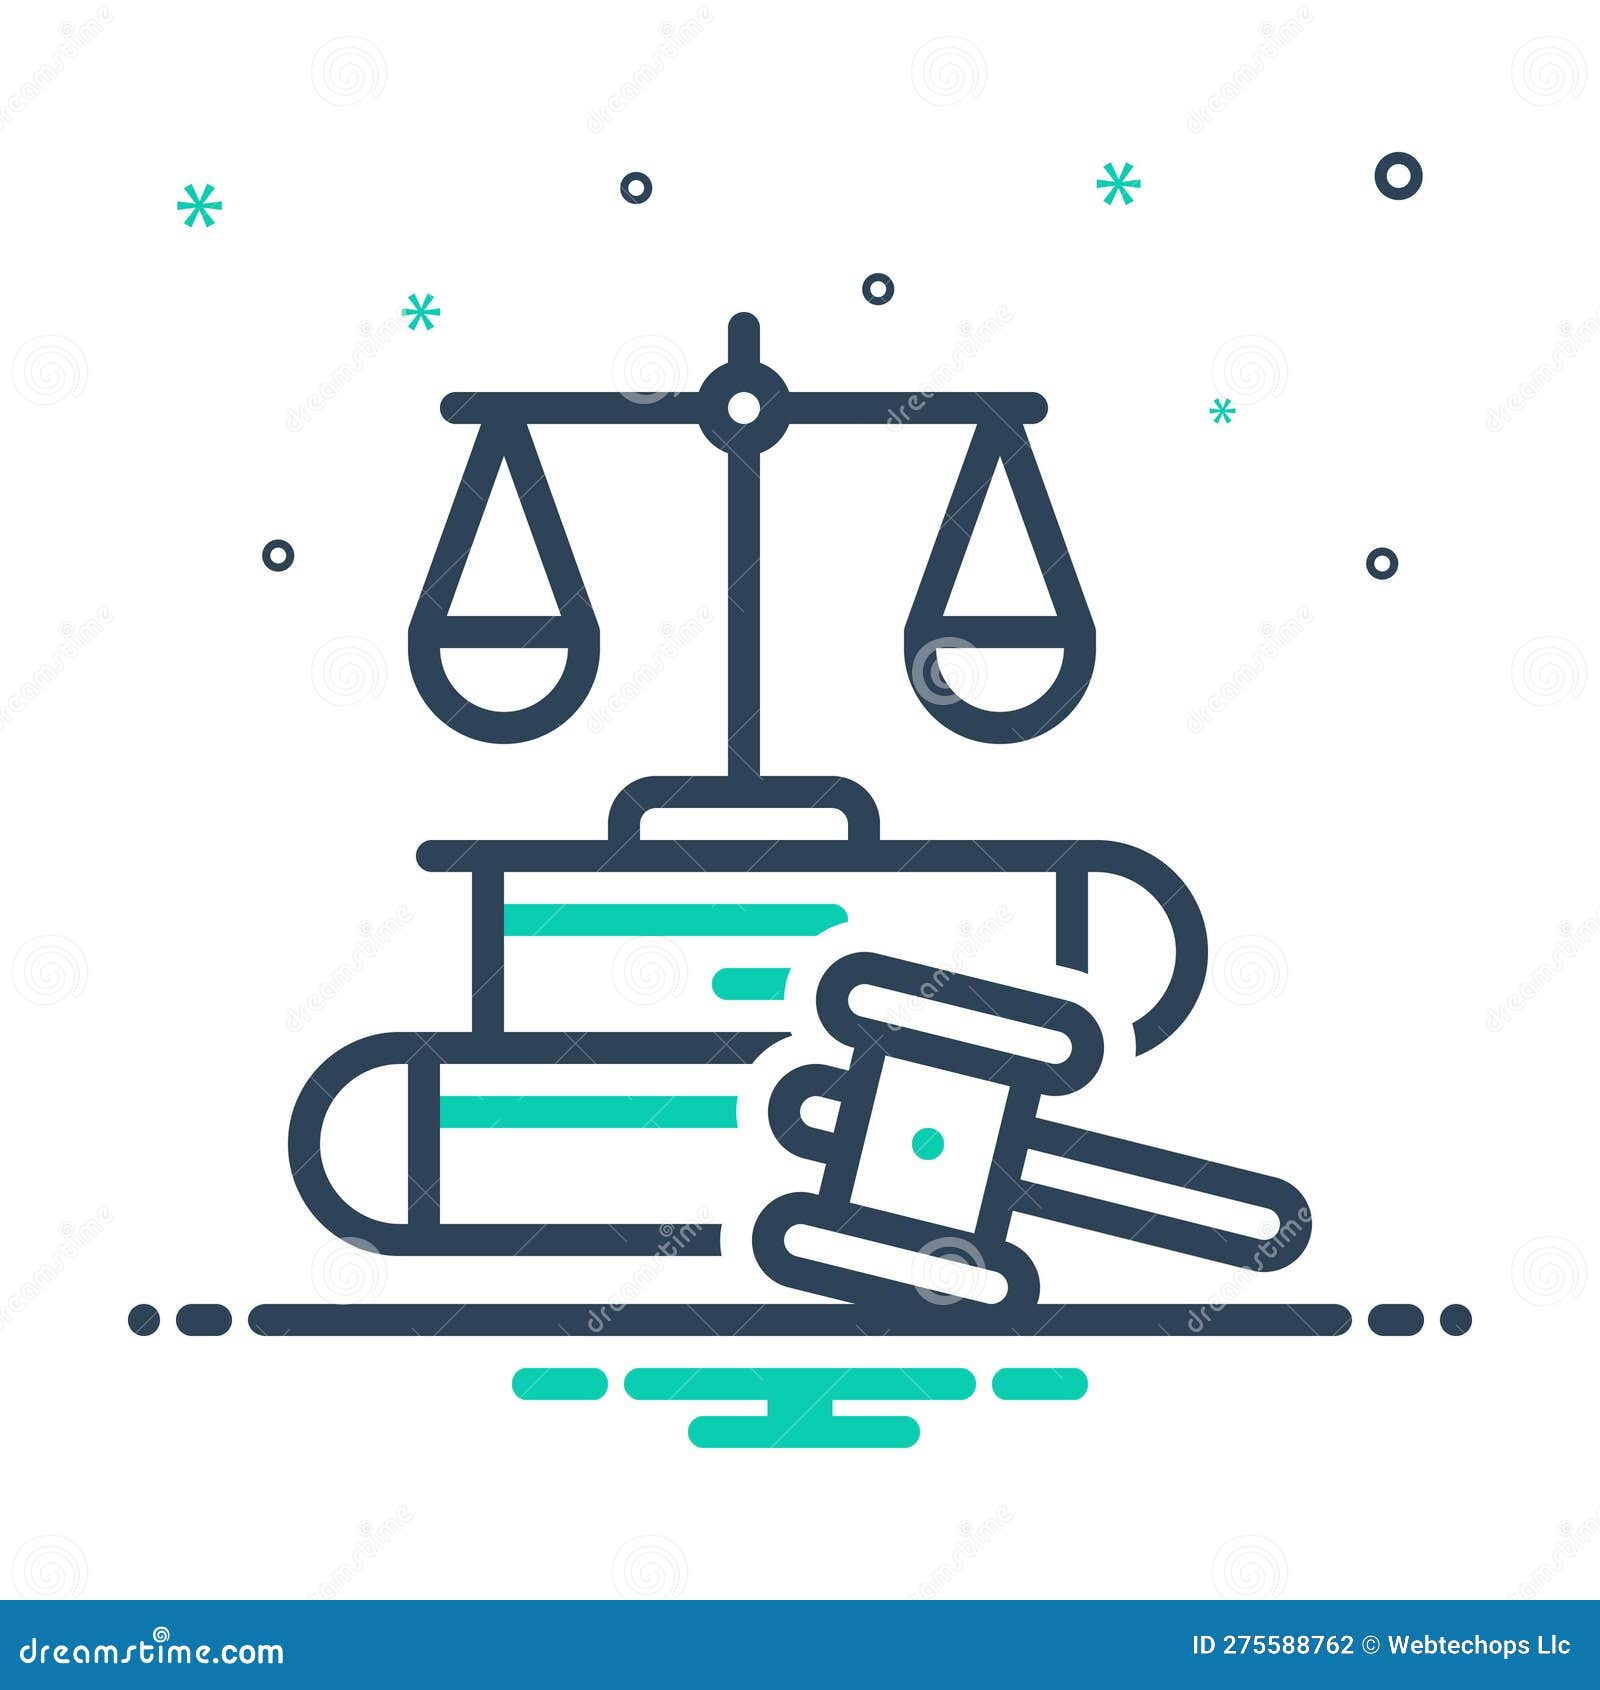 mix icon for legally, law and justice